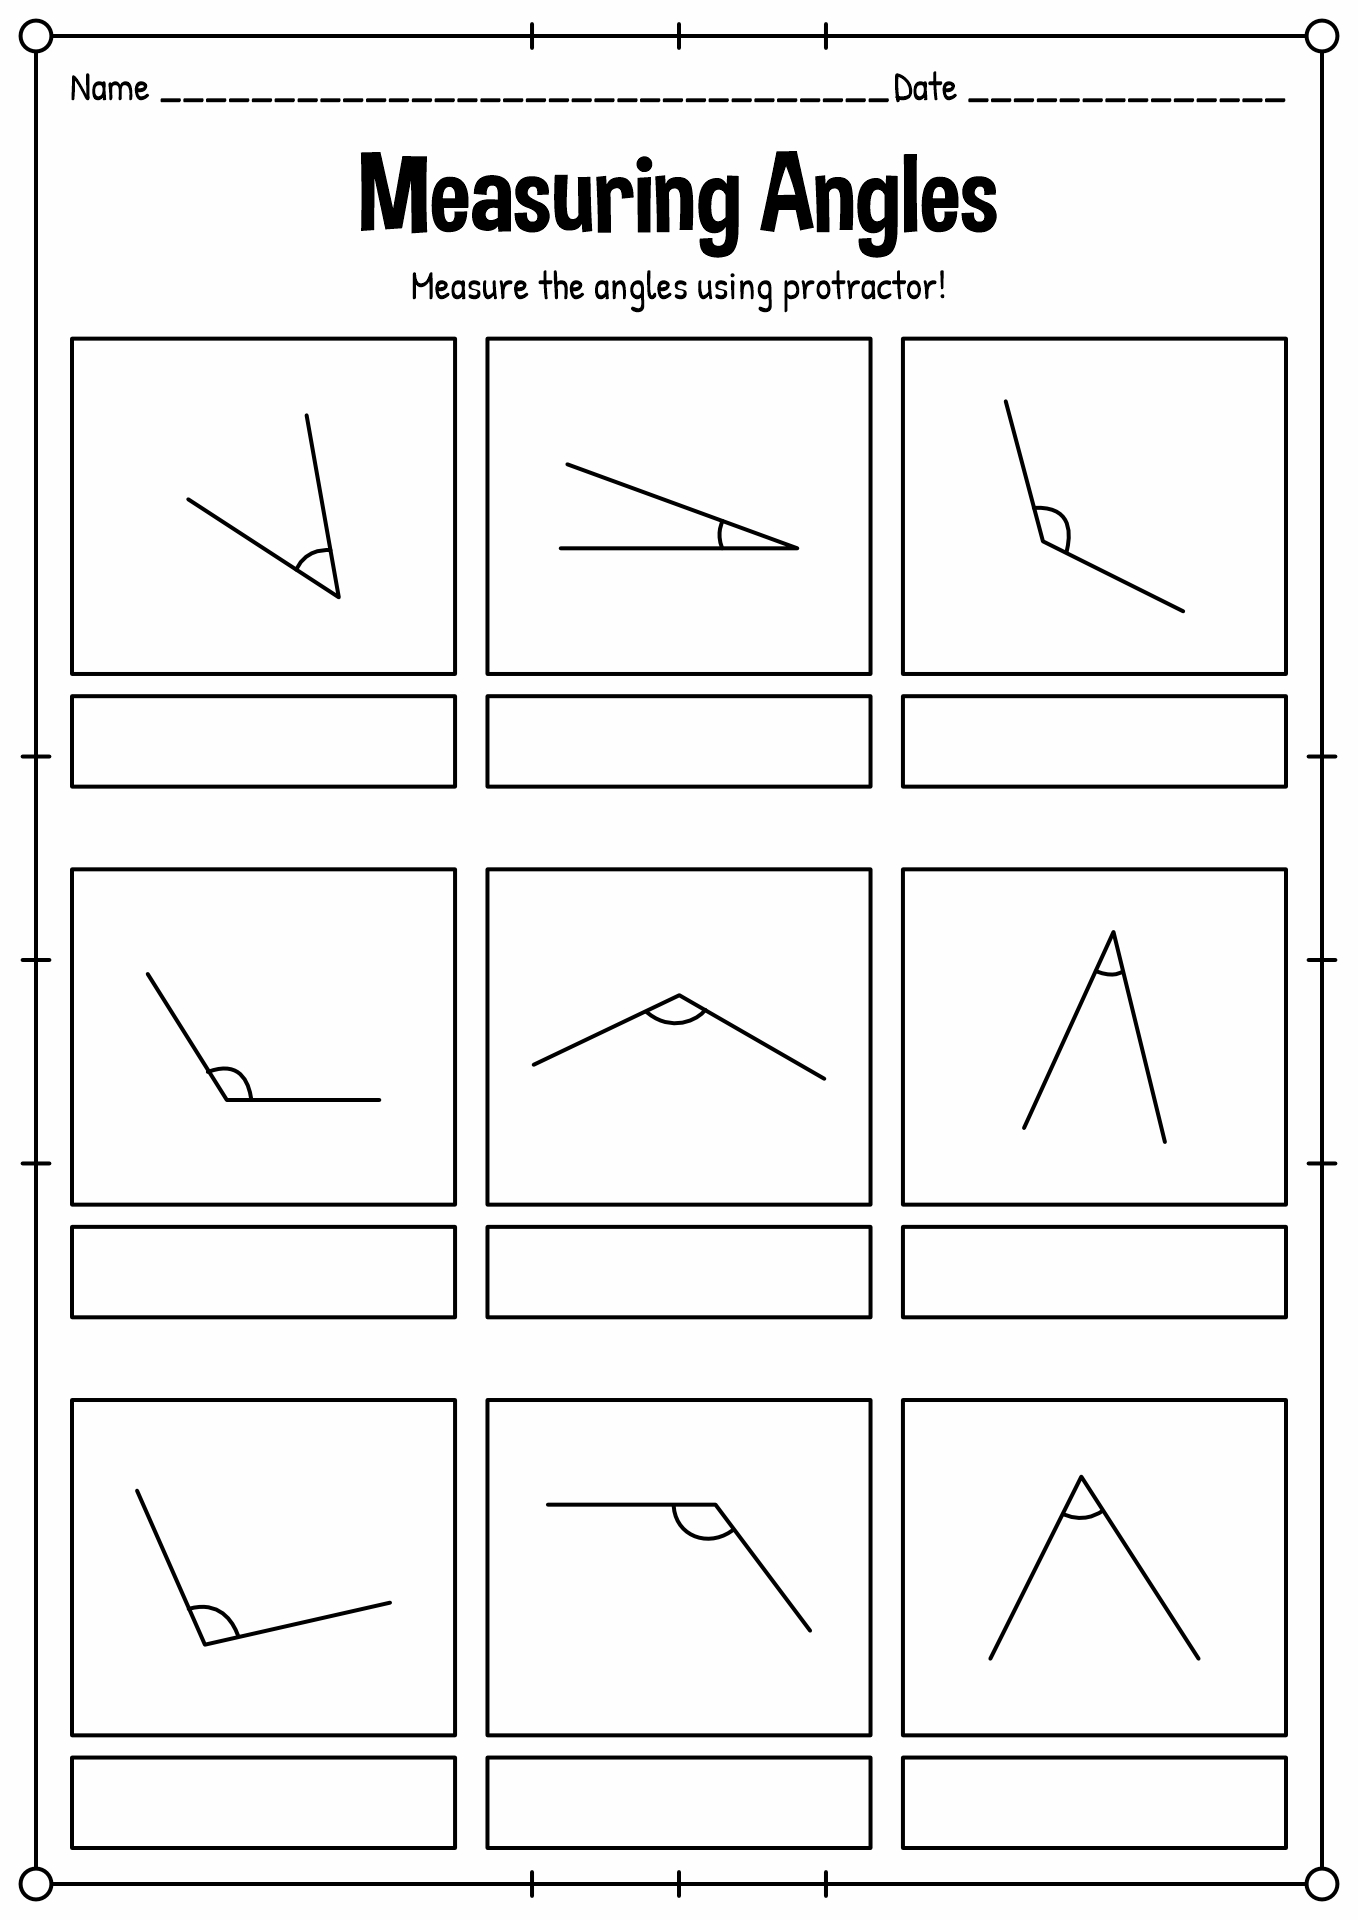 measuring-angles-with-protractor-worksheet